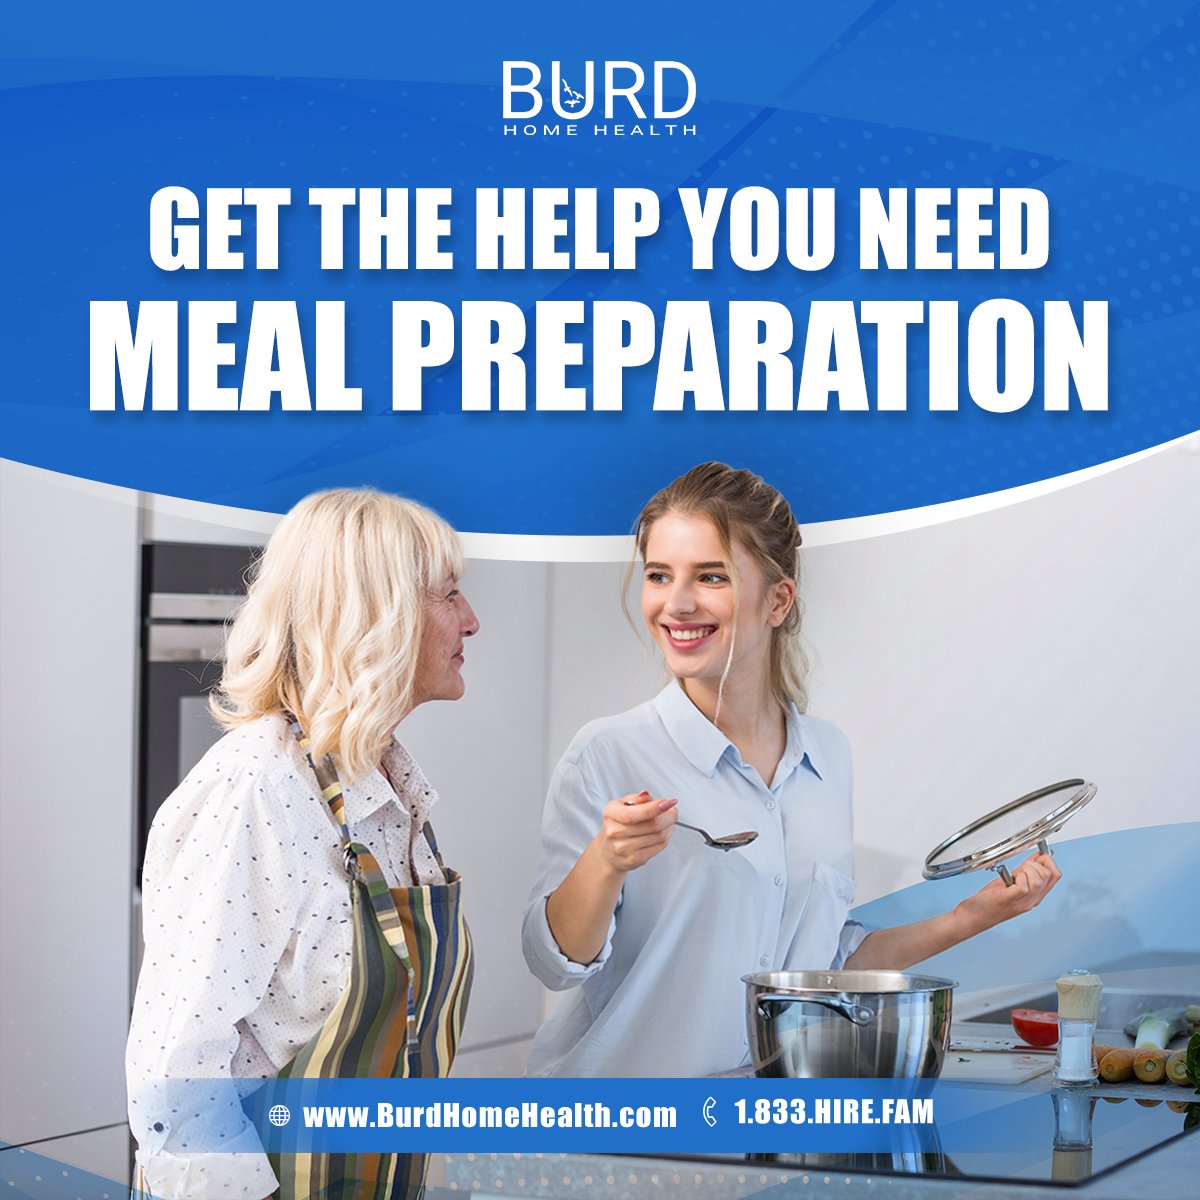 Take control of your nutrition with BURD Home Health. 
Hire your family or friends for meal prep and other services, while they get compensated for their time. 
It's about your health, your choice, your way. 

#BURDHomeHealth | #ProperNutrition | #MealPrep | #ConsumerDirectedCare